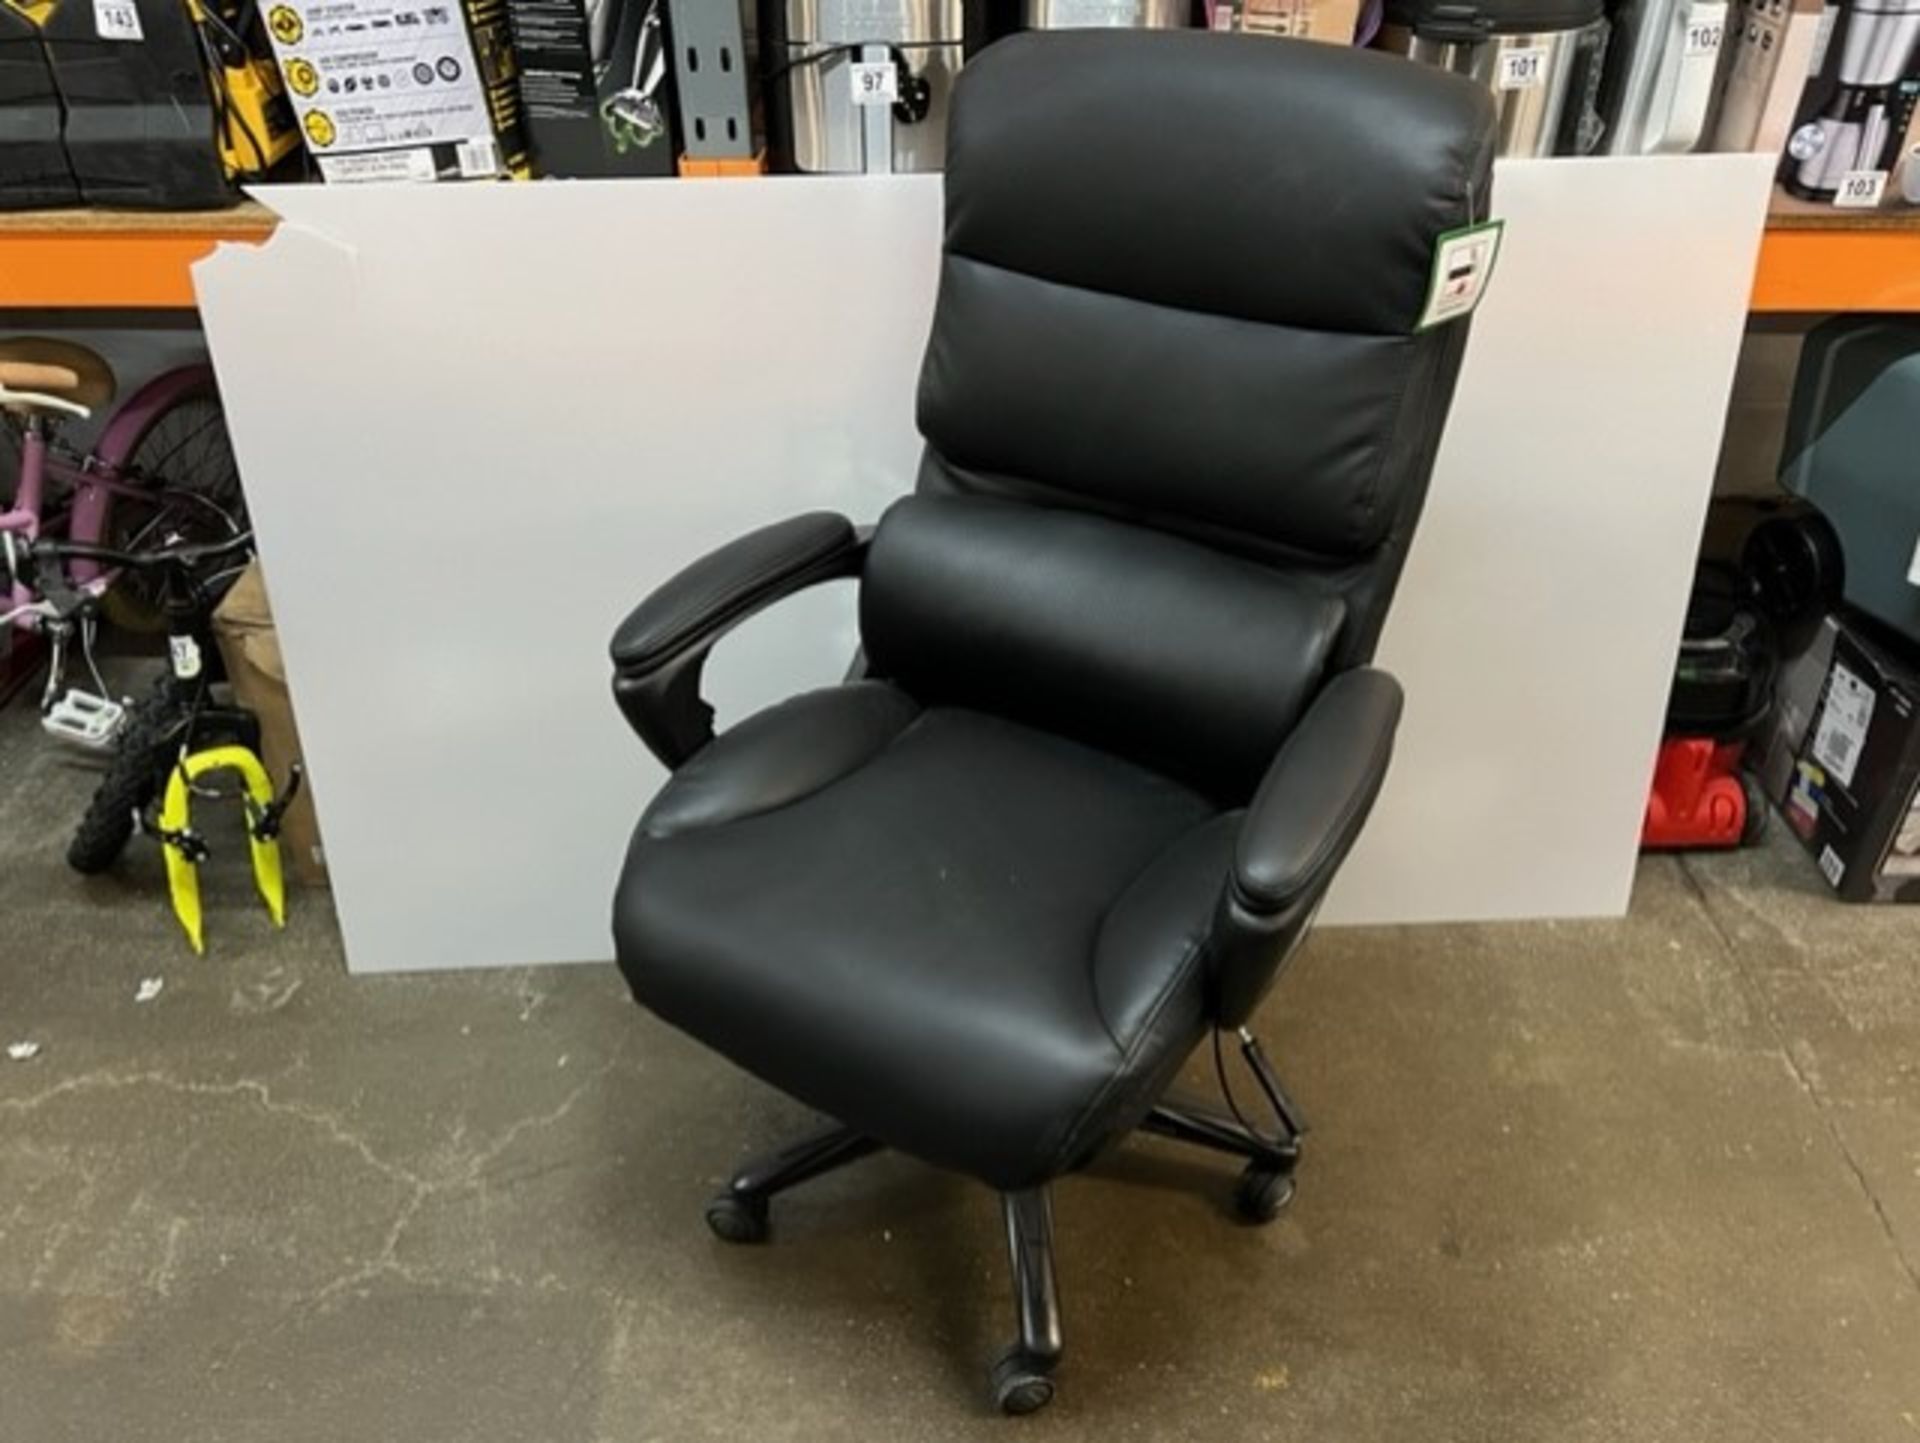 1 LA-Z-BOY AIR EXECUTIVE BLACK BONDED LEATHER OFFICE CHAIR RRP Â£299 (WORKING)